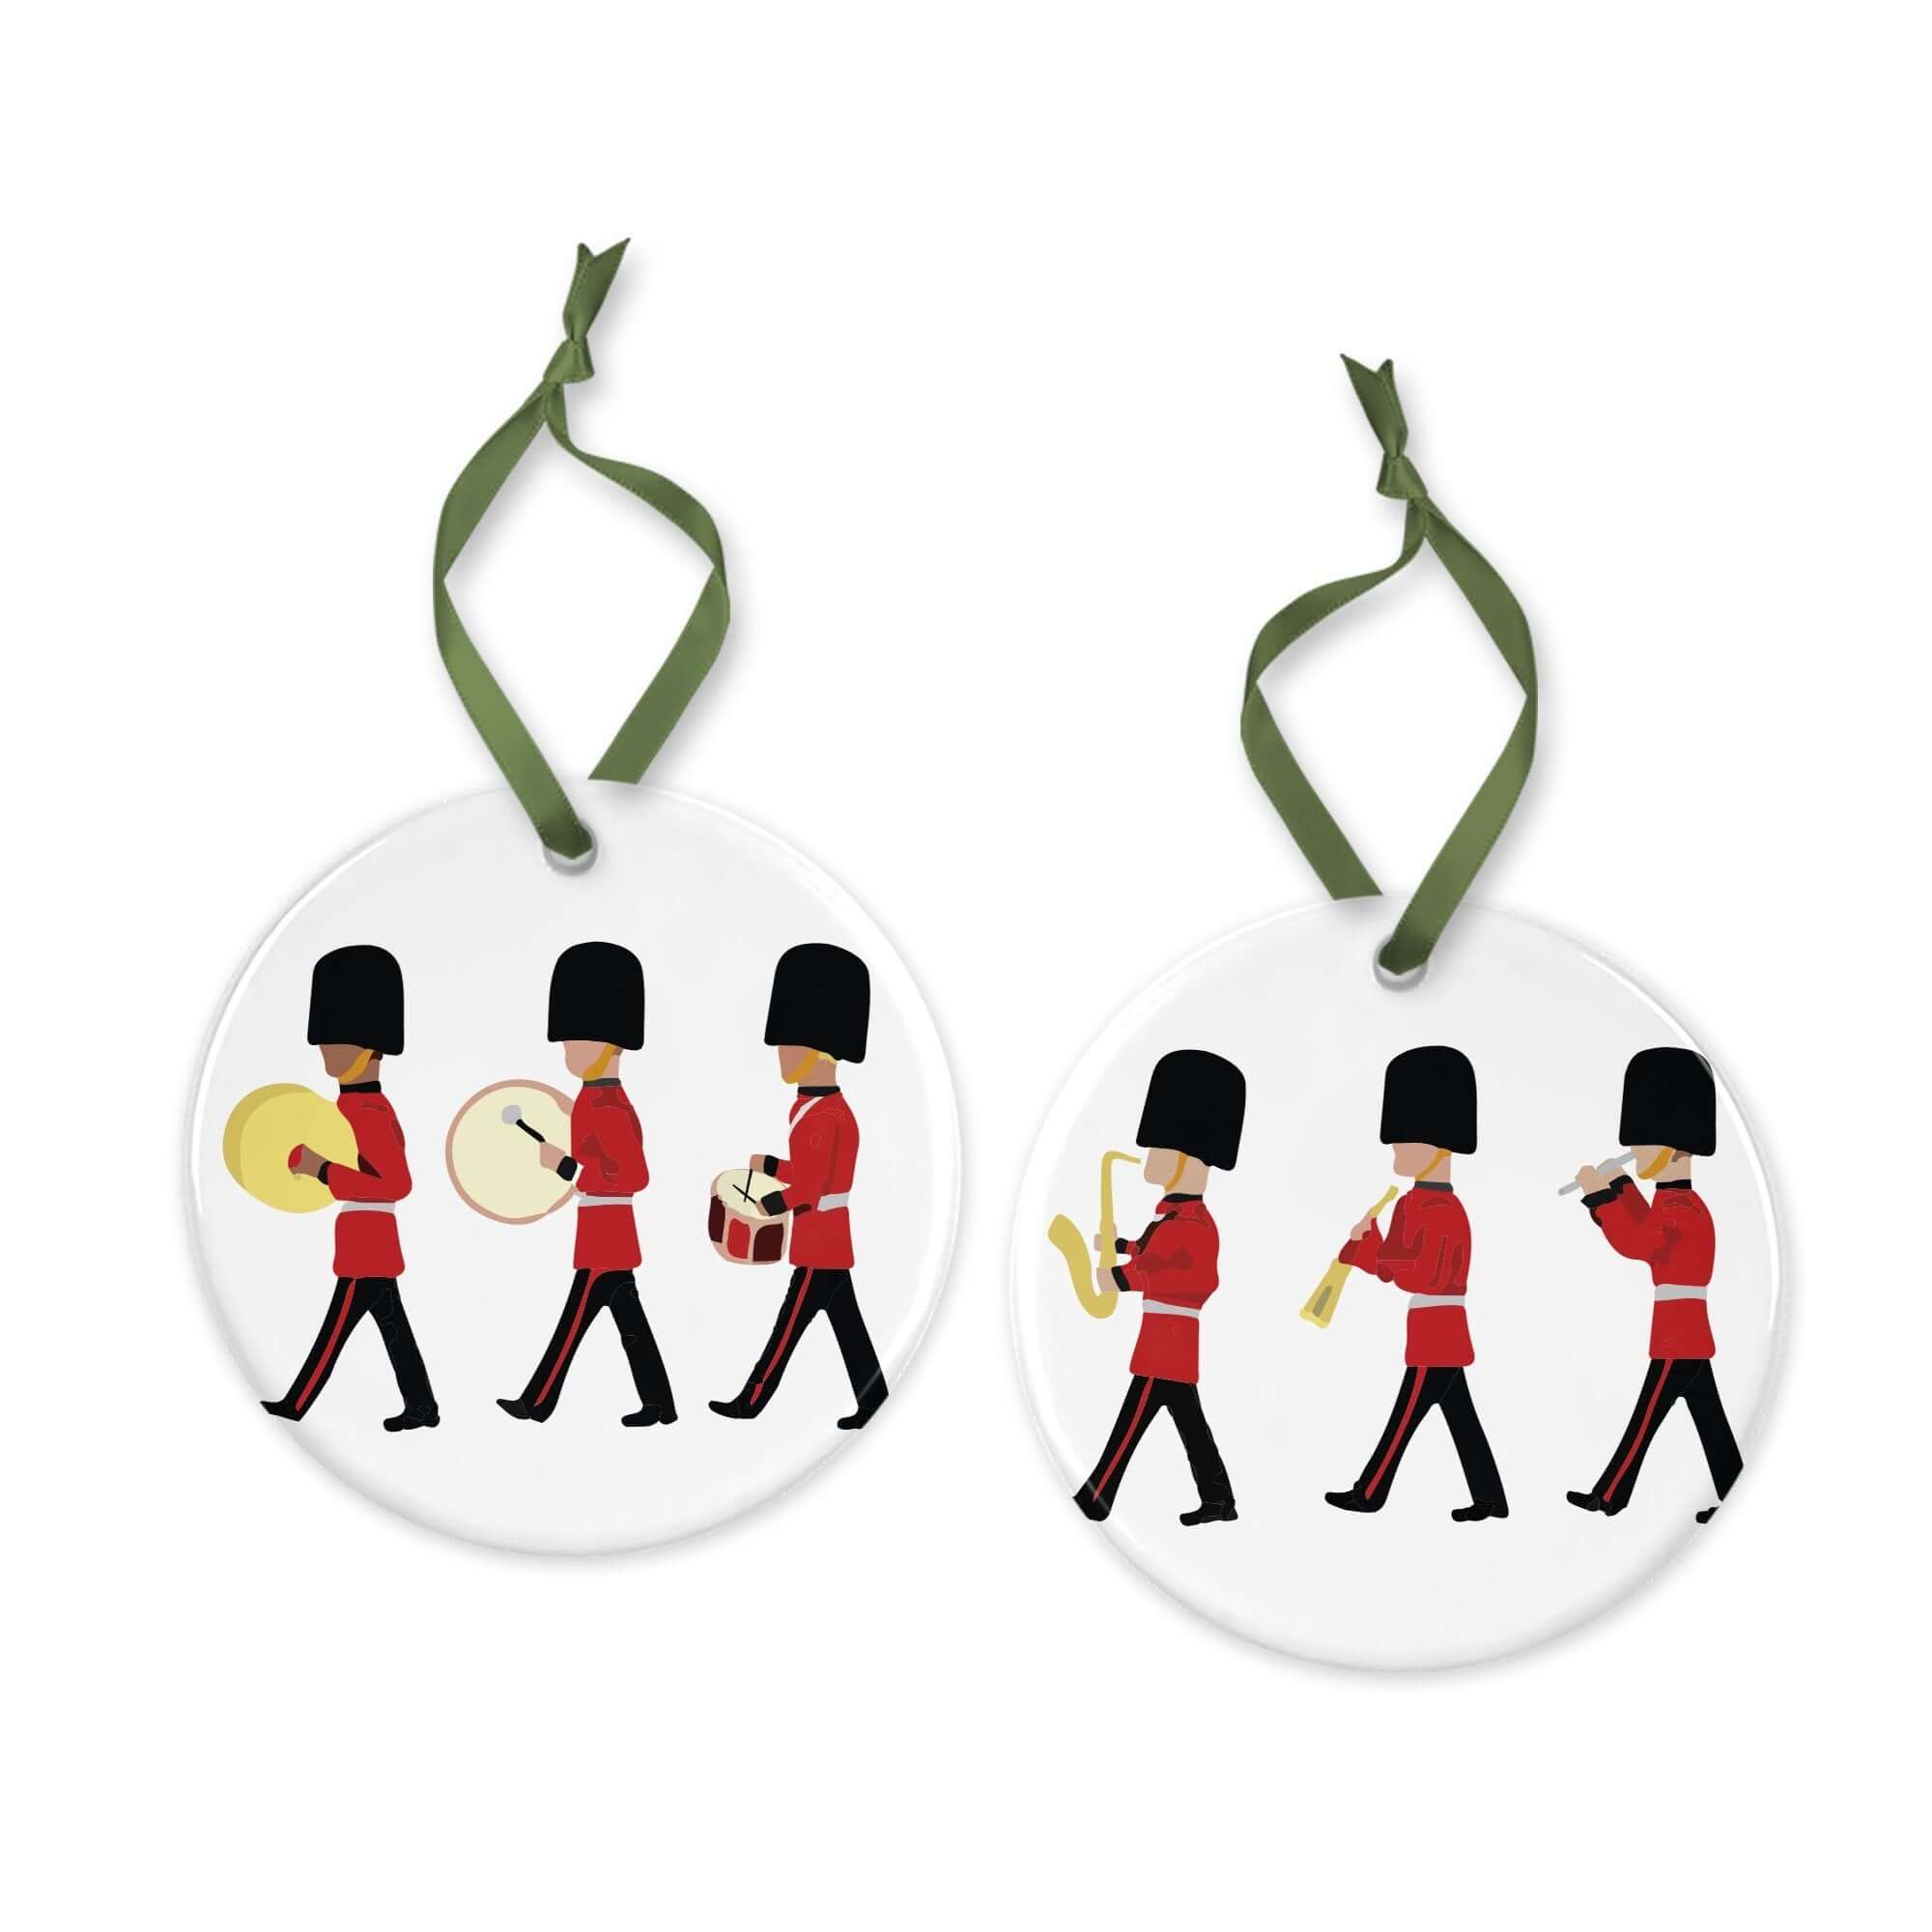 Changing of the Guard Christmas Decoration | Hand-printed Tree Decoration Christmas Decorations Mustard and Gray Ltd Shropshire UK